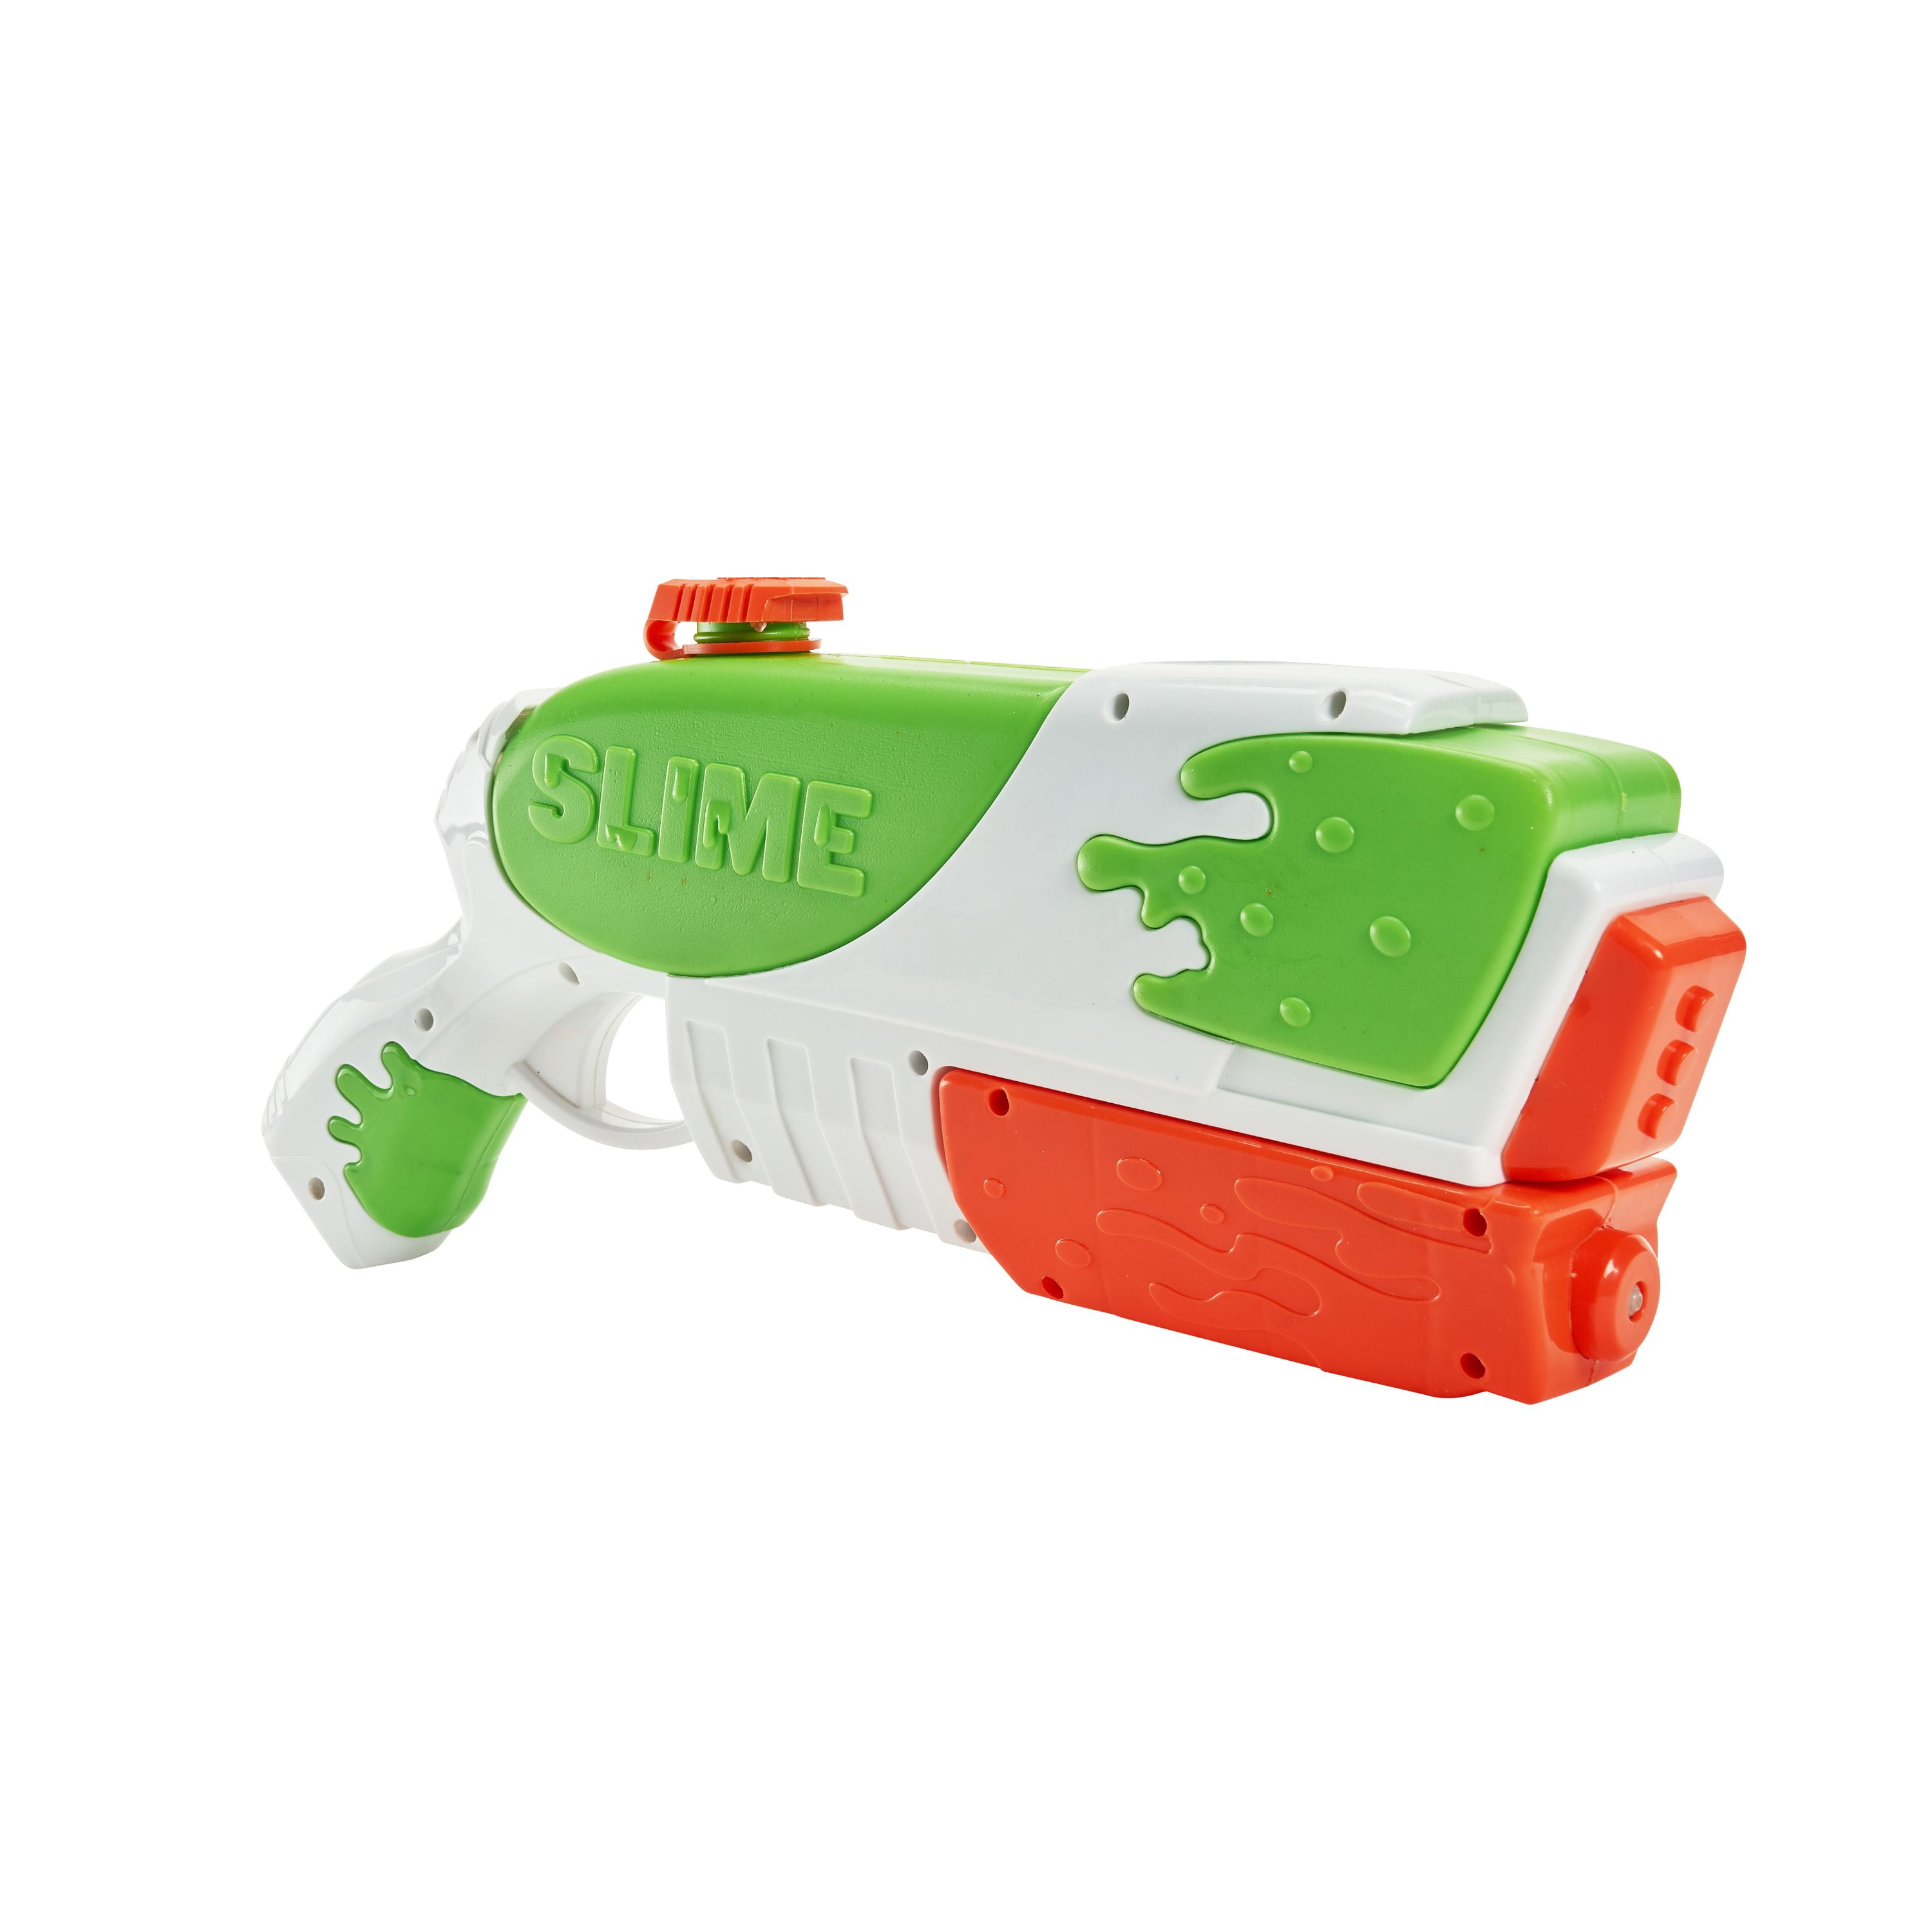 New Nickelodeon Slime Bubble Blower Includes Real Slim 